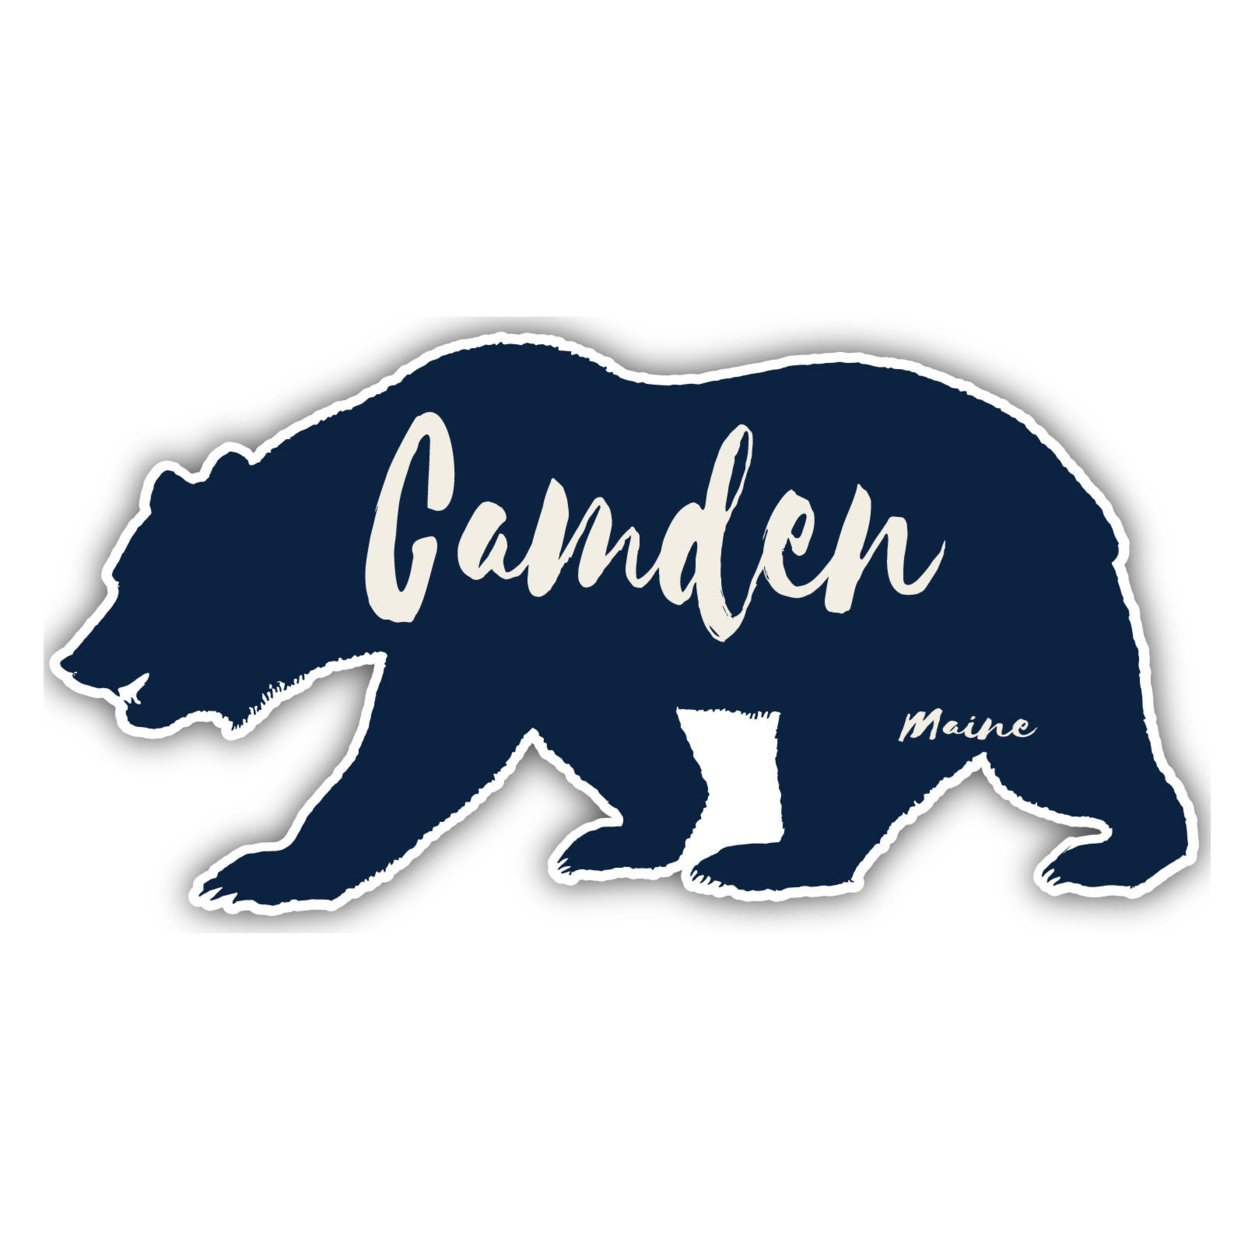 Camden Maine Souvenir Decorative Stickers (Choose Theme And Size) - 4-Pack, 10-Inch, Tent